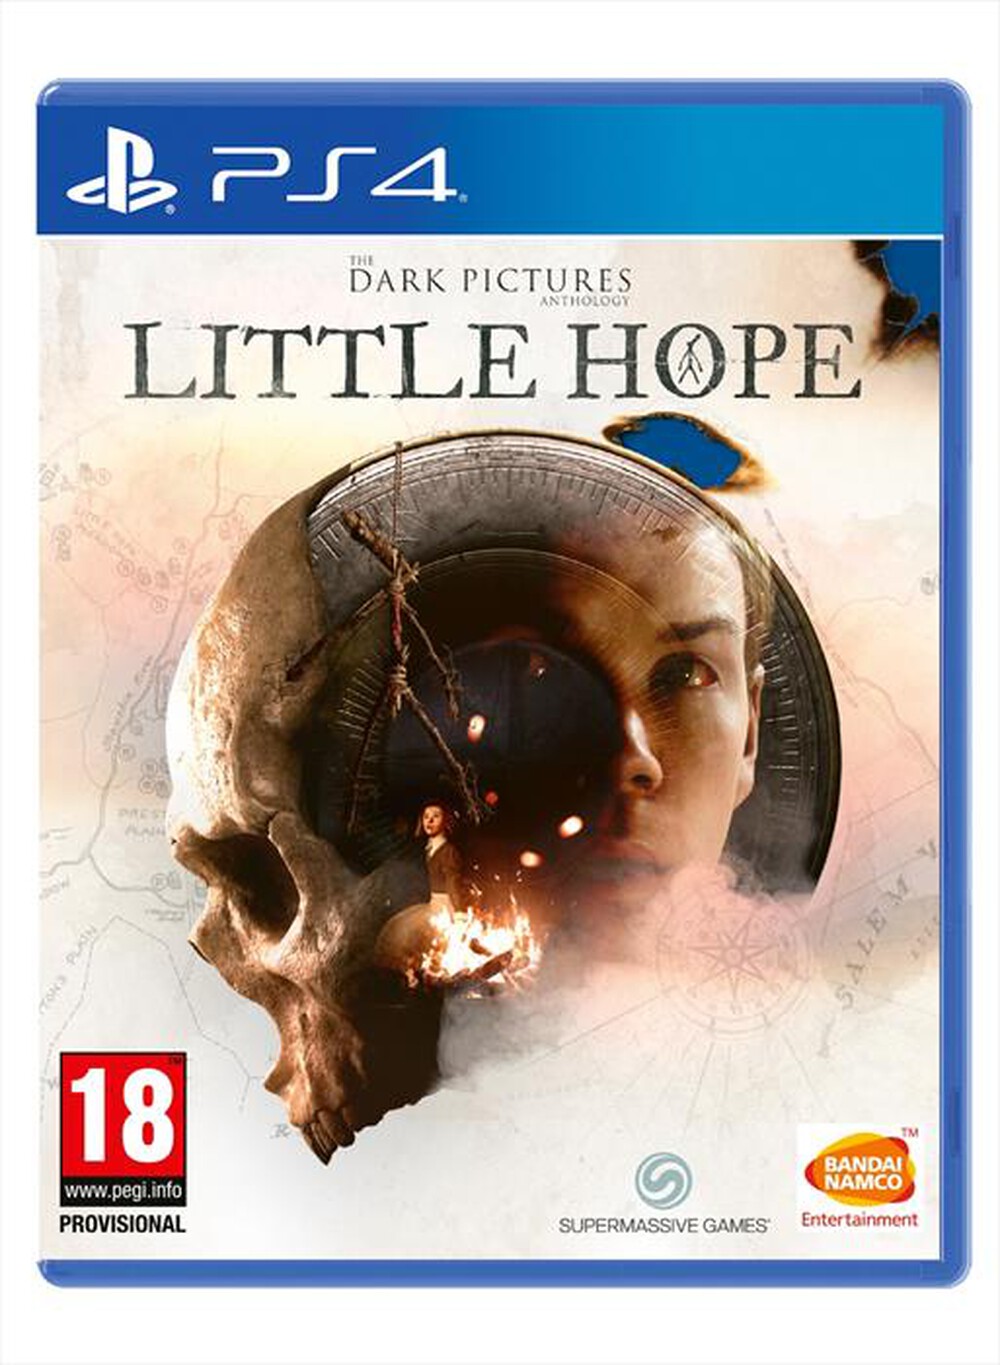 "NAMCO - THE DARK PICTURES ANTHOLOGY: LITTLE HOPE PS4"